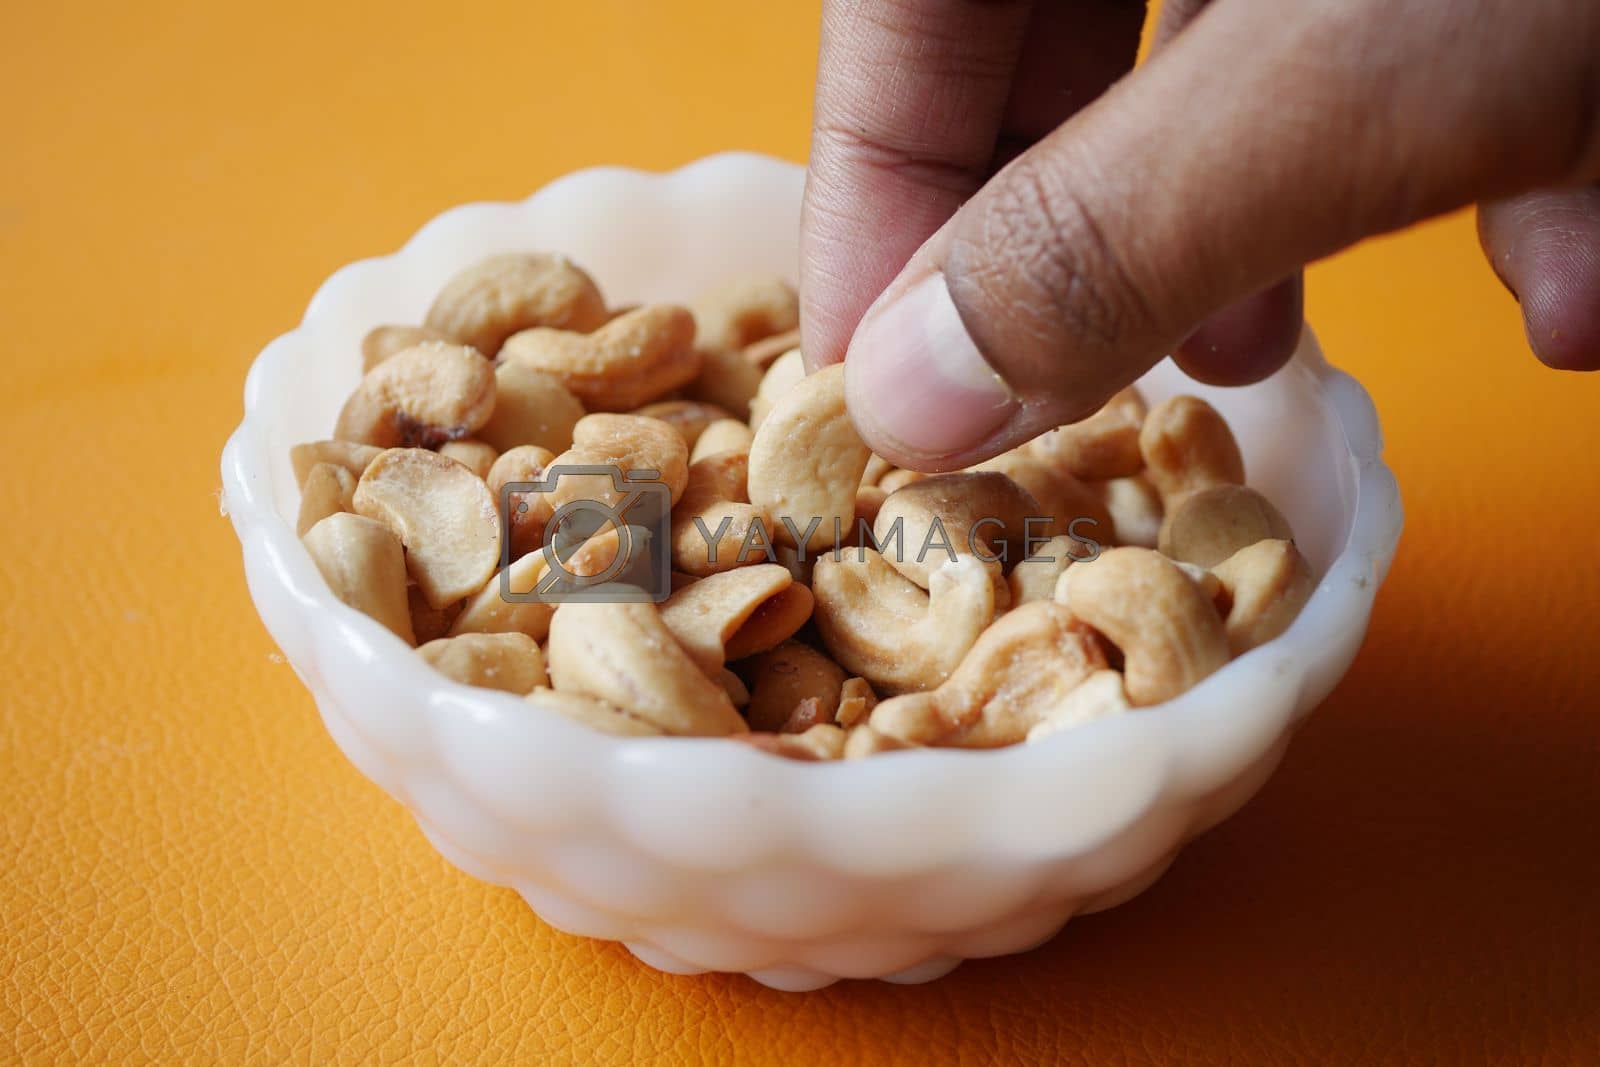 Royalty free image of hand pick a cashew nut from a small bowl by towfiq007